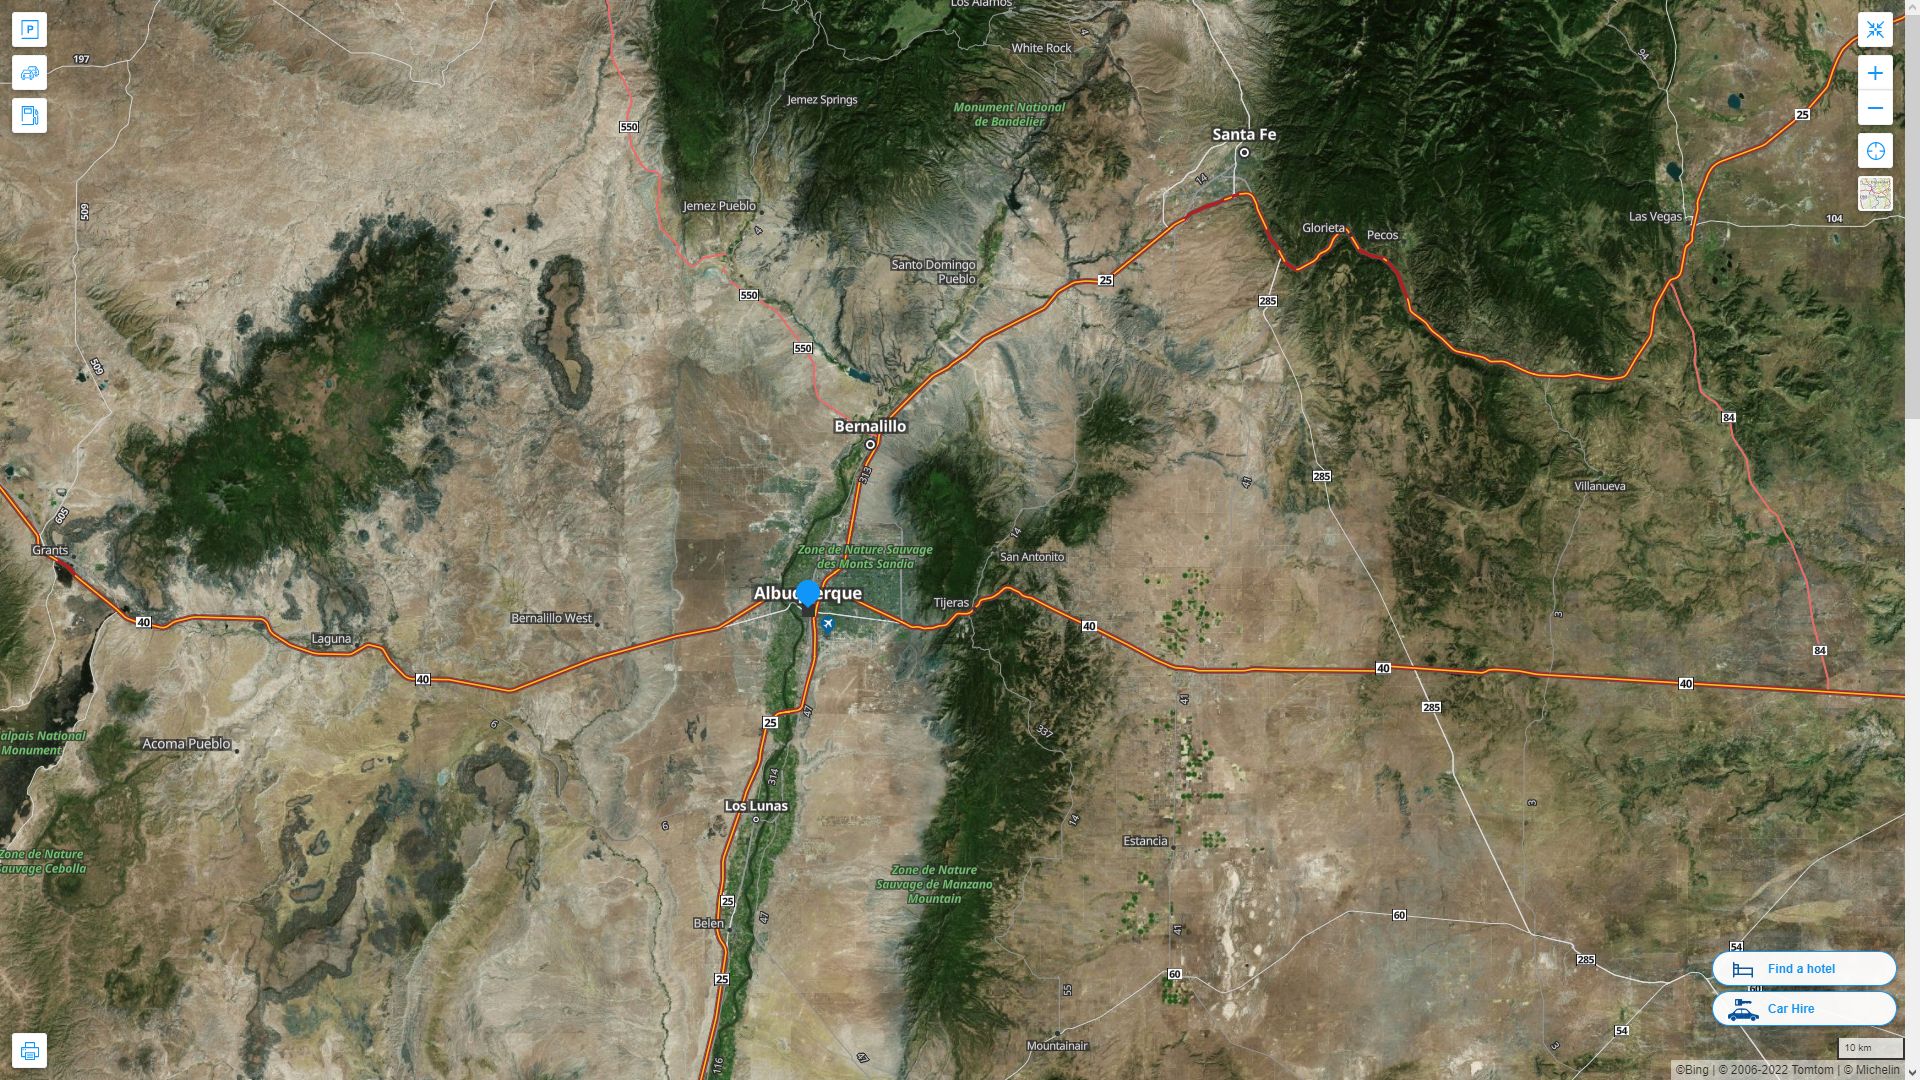 Albuquerque New Mexico Highway and Road Map with Satellite View